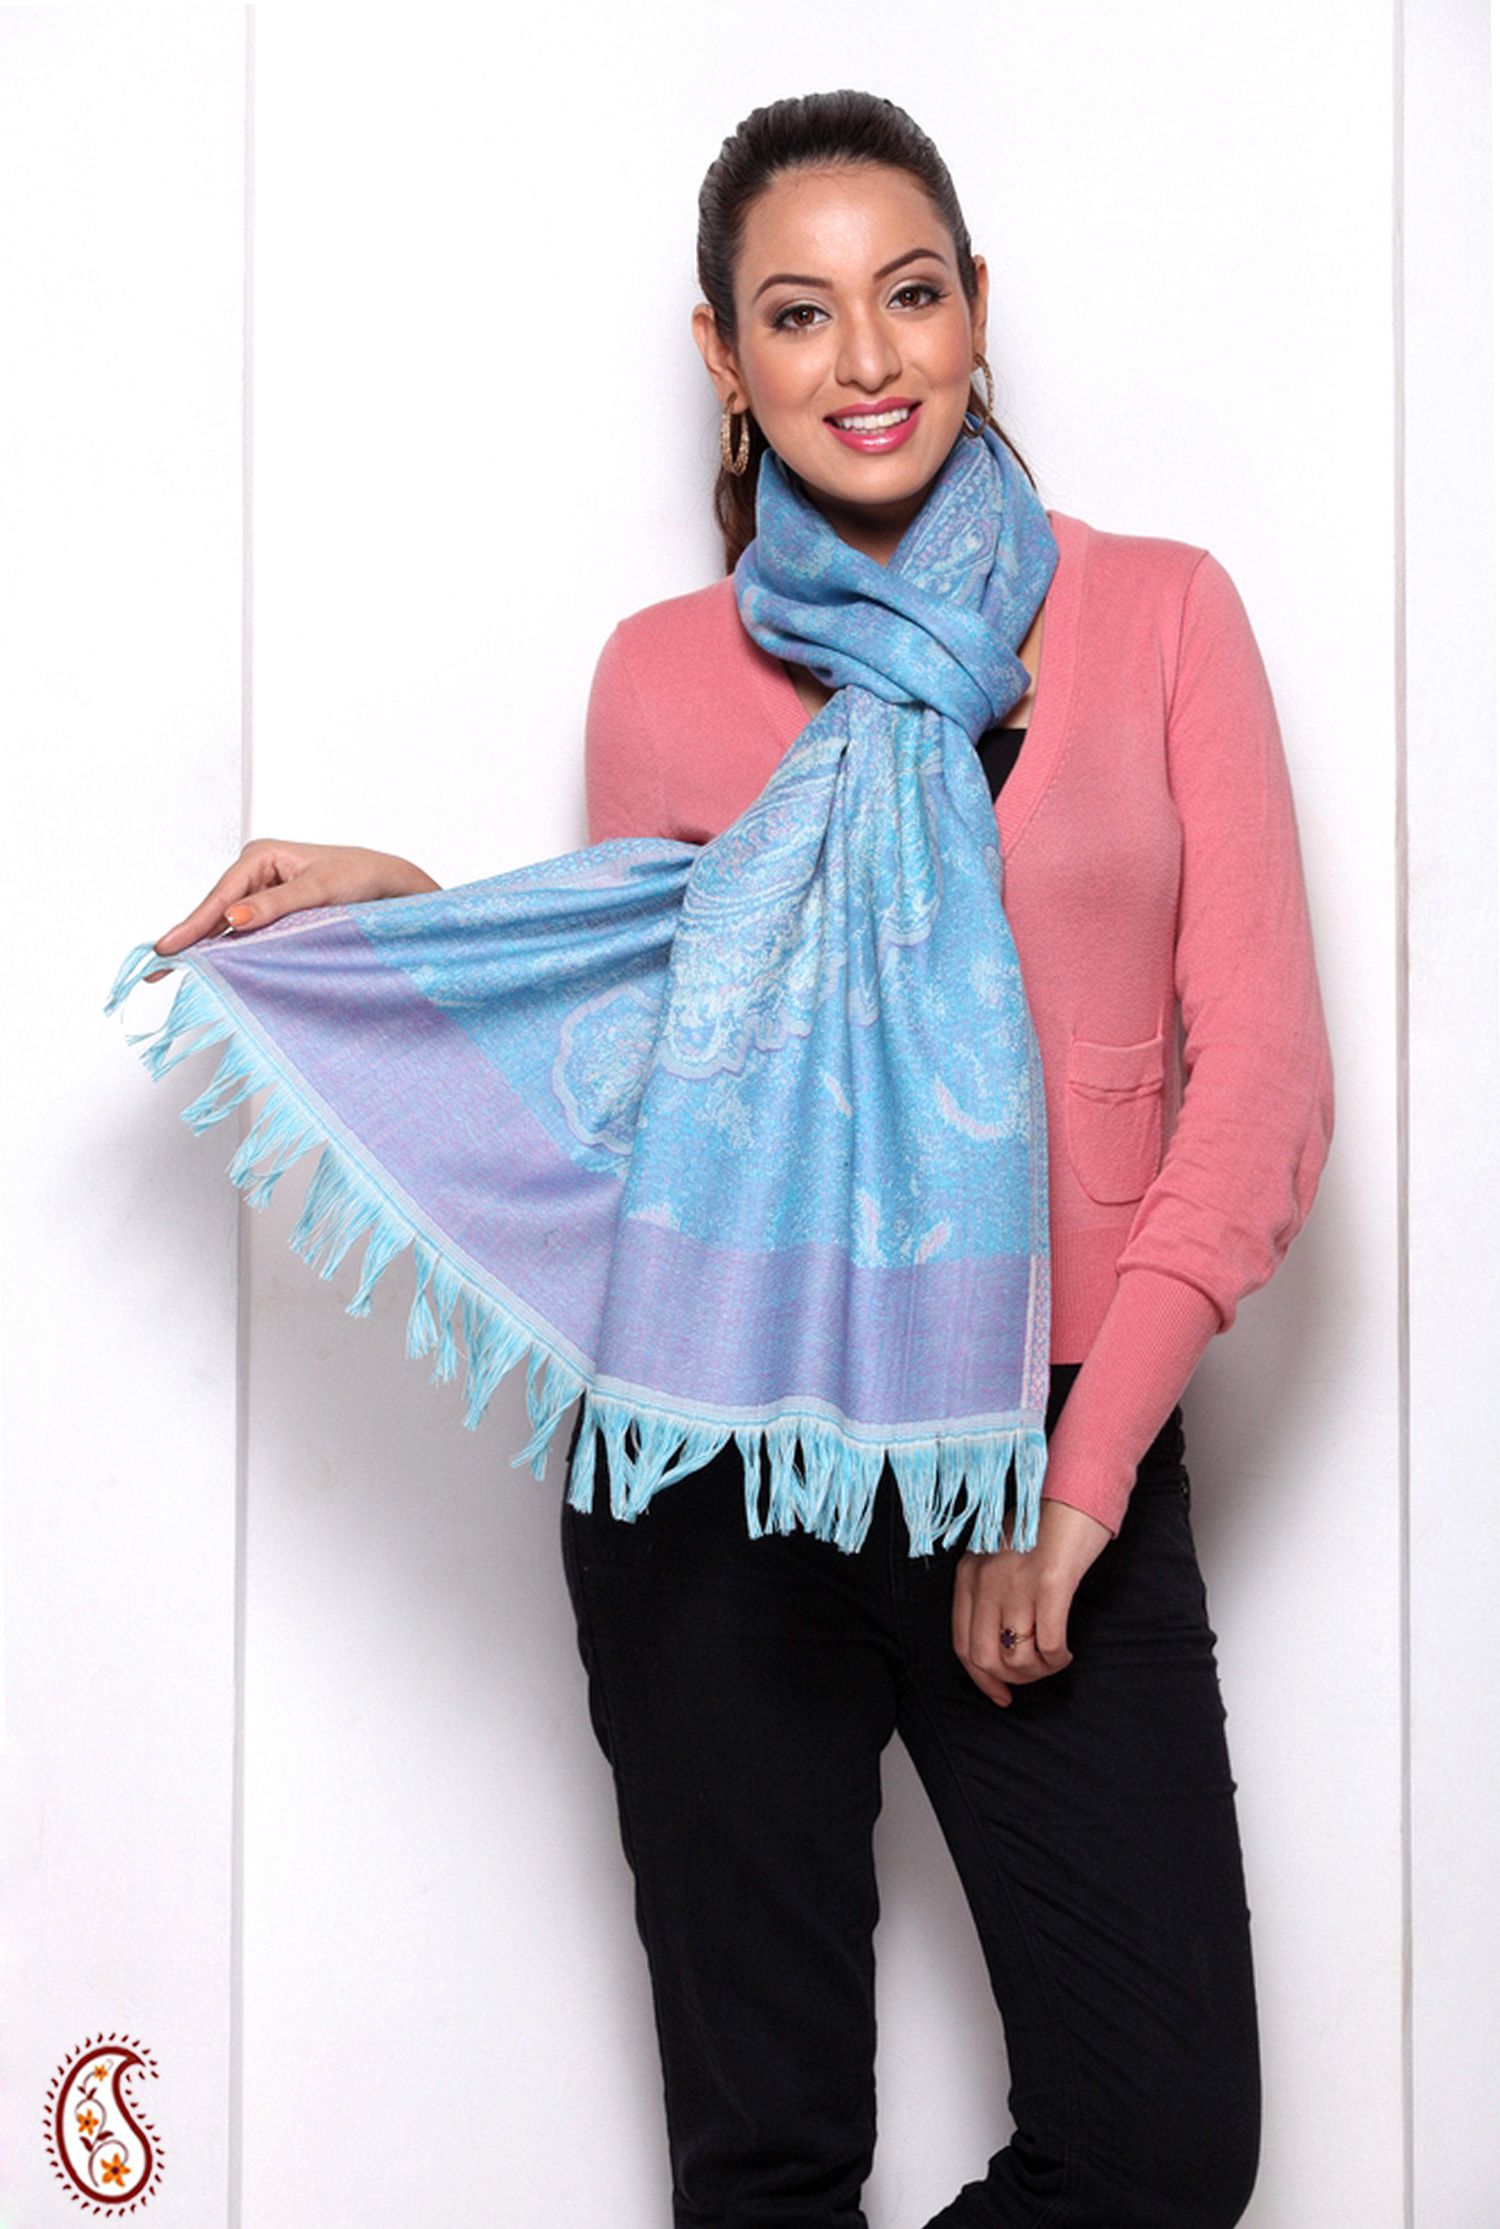 Aapno Rajasthan Blue Stoles: Buy Online at Low Price in India - Snapdeal